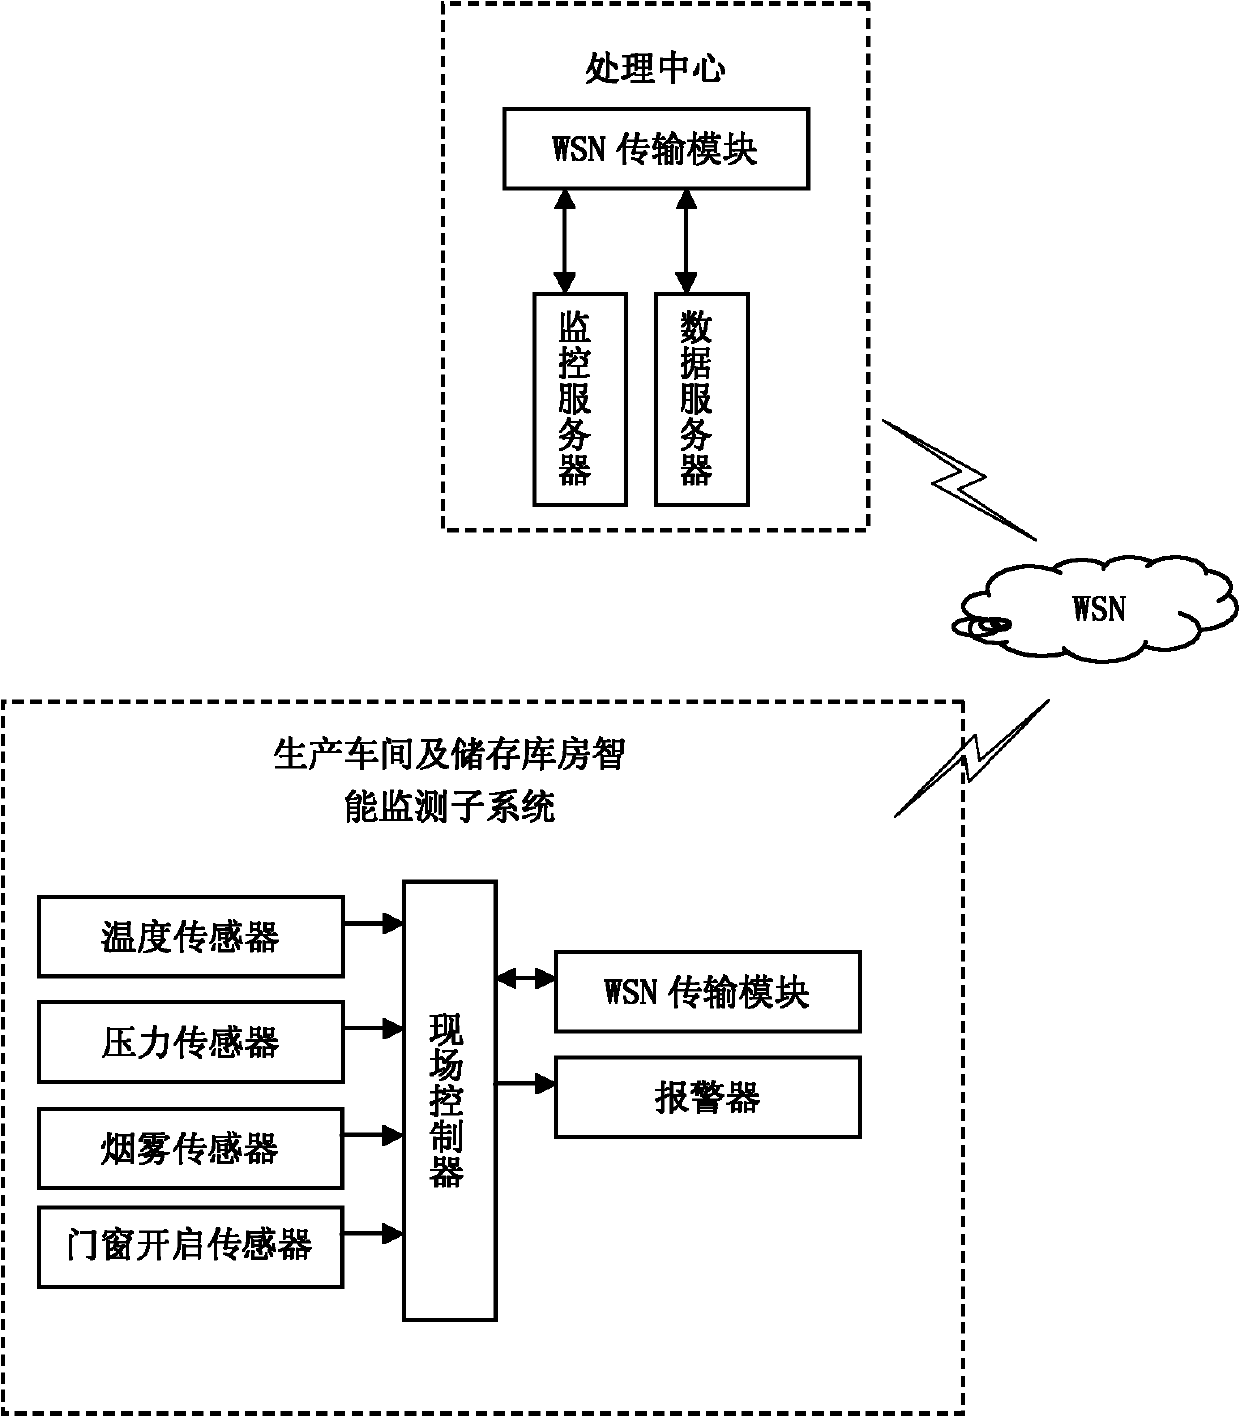 Safety monitoring system and method for firework/cracker manufacturing workshops and storerooms